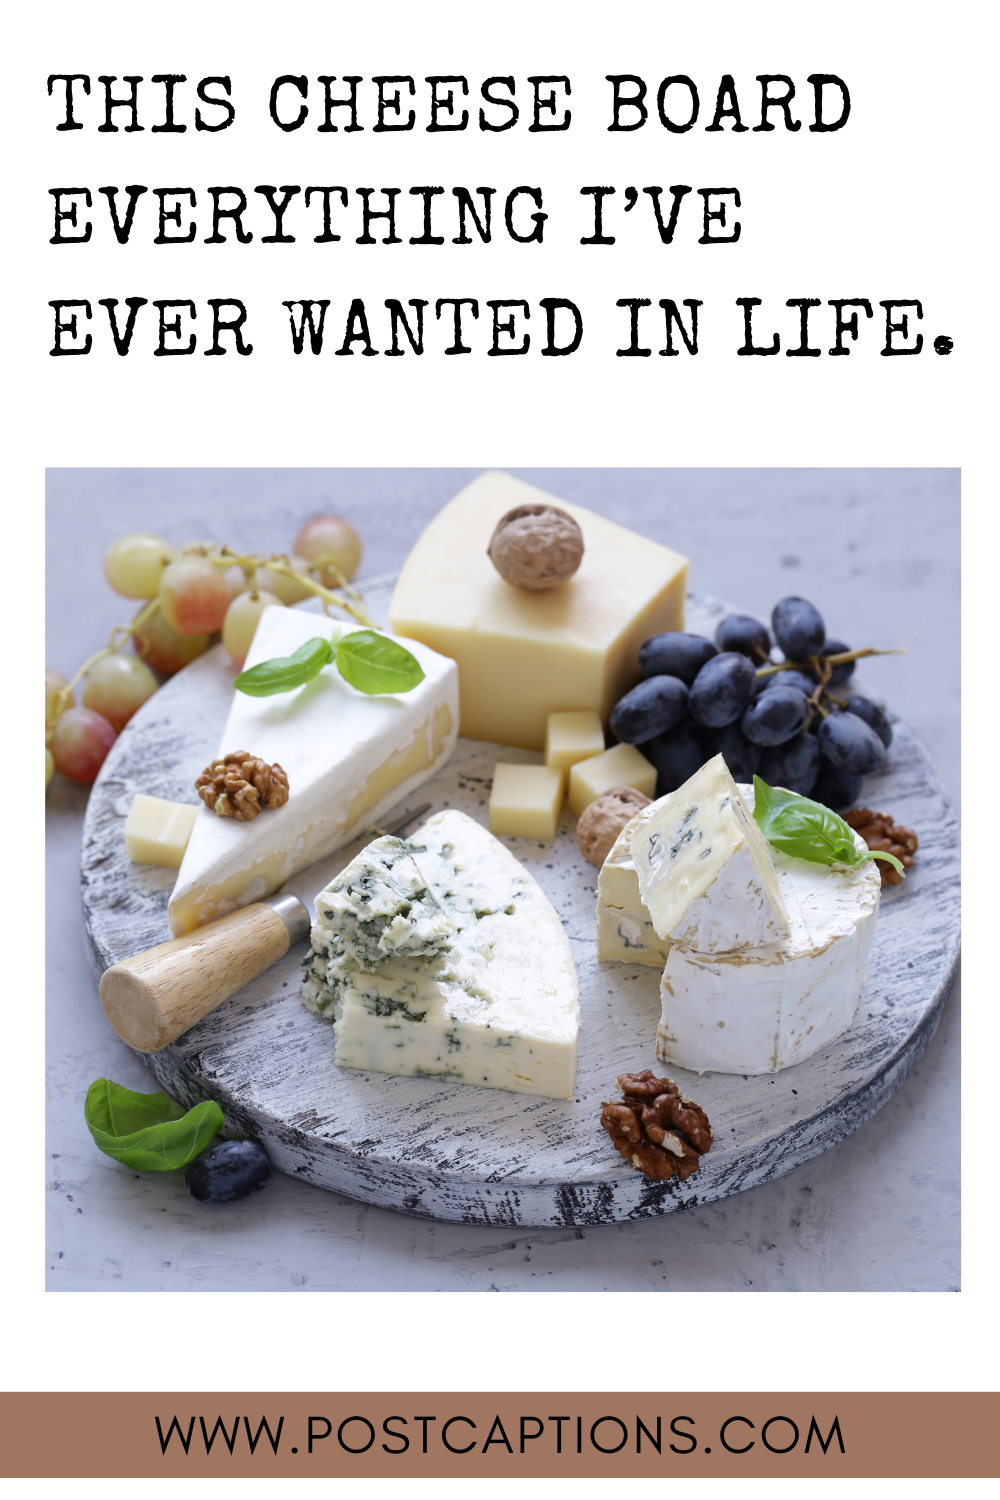 Cheese board captions for Instagram